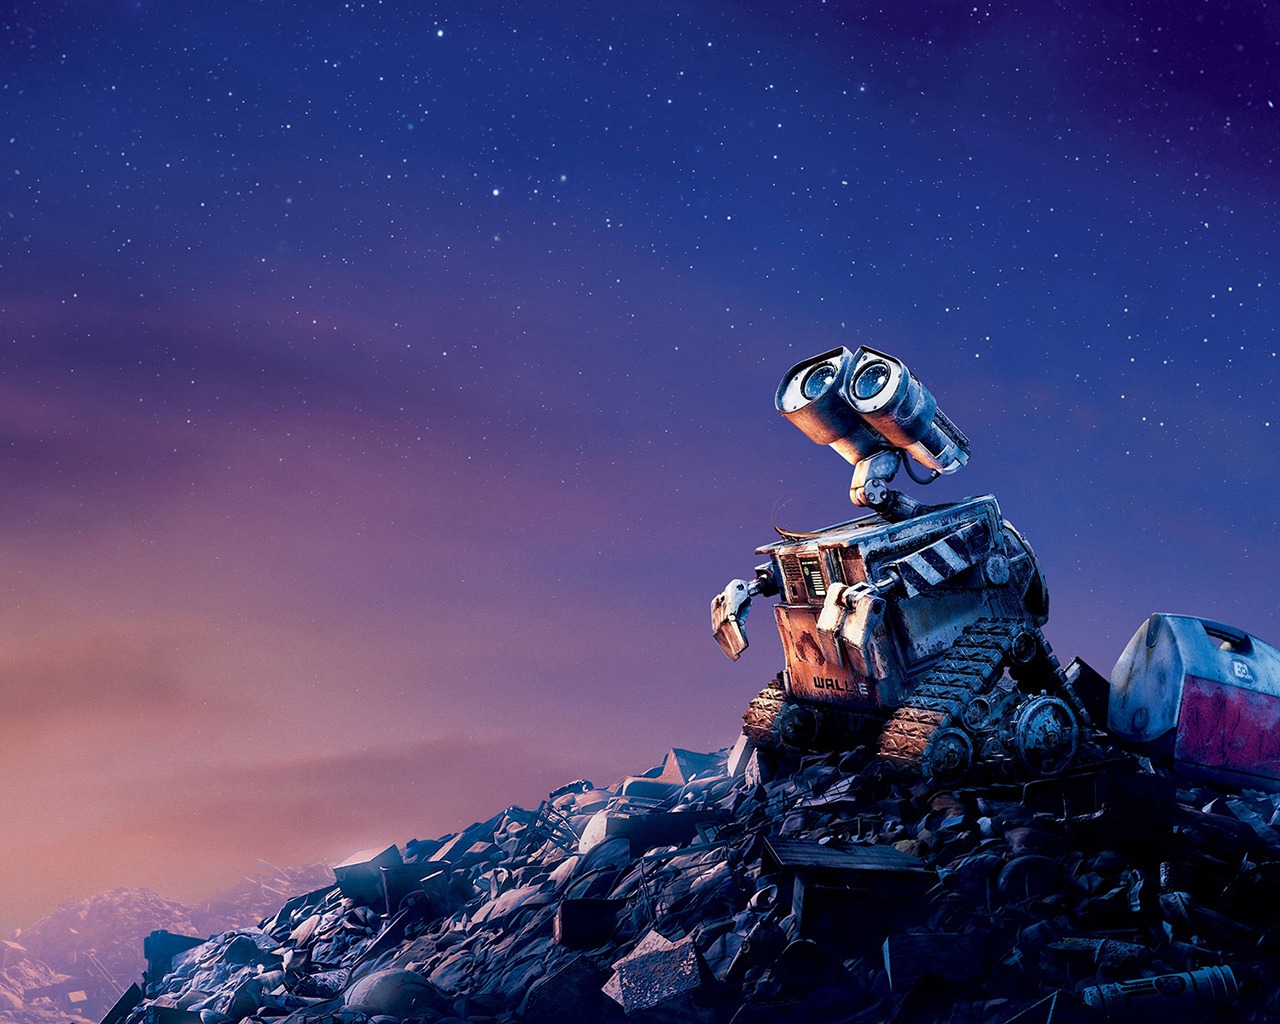 Wall-E for 1280 x 1024 resolution